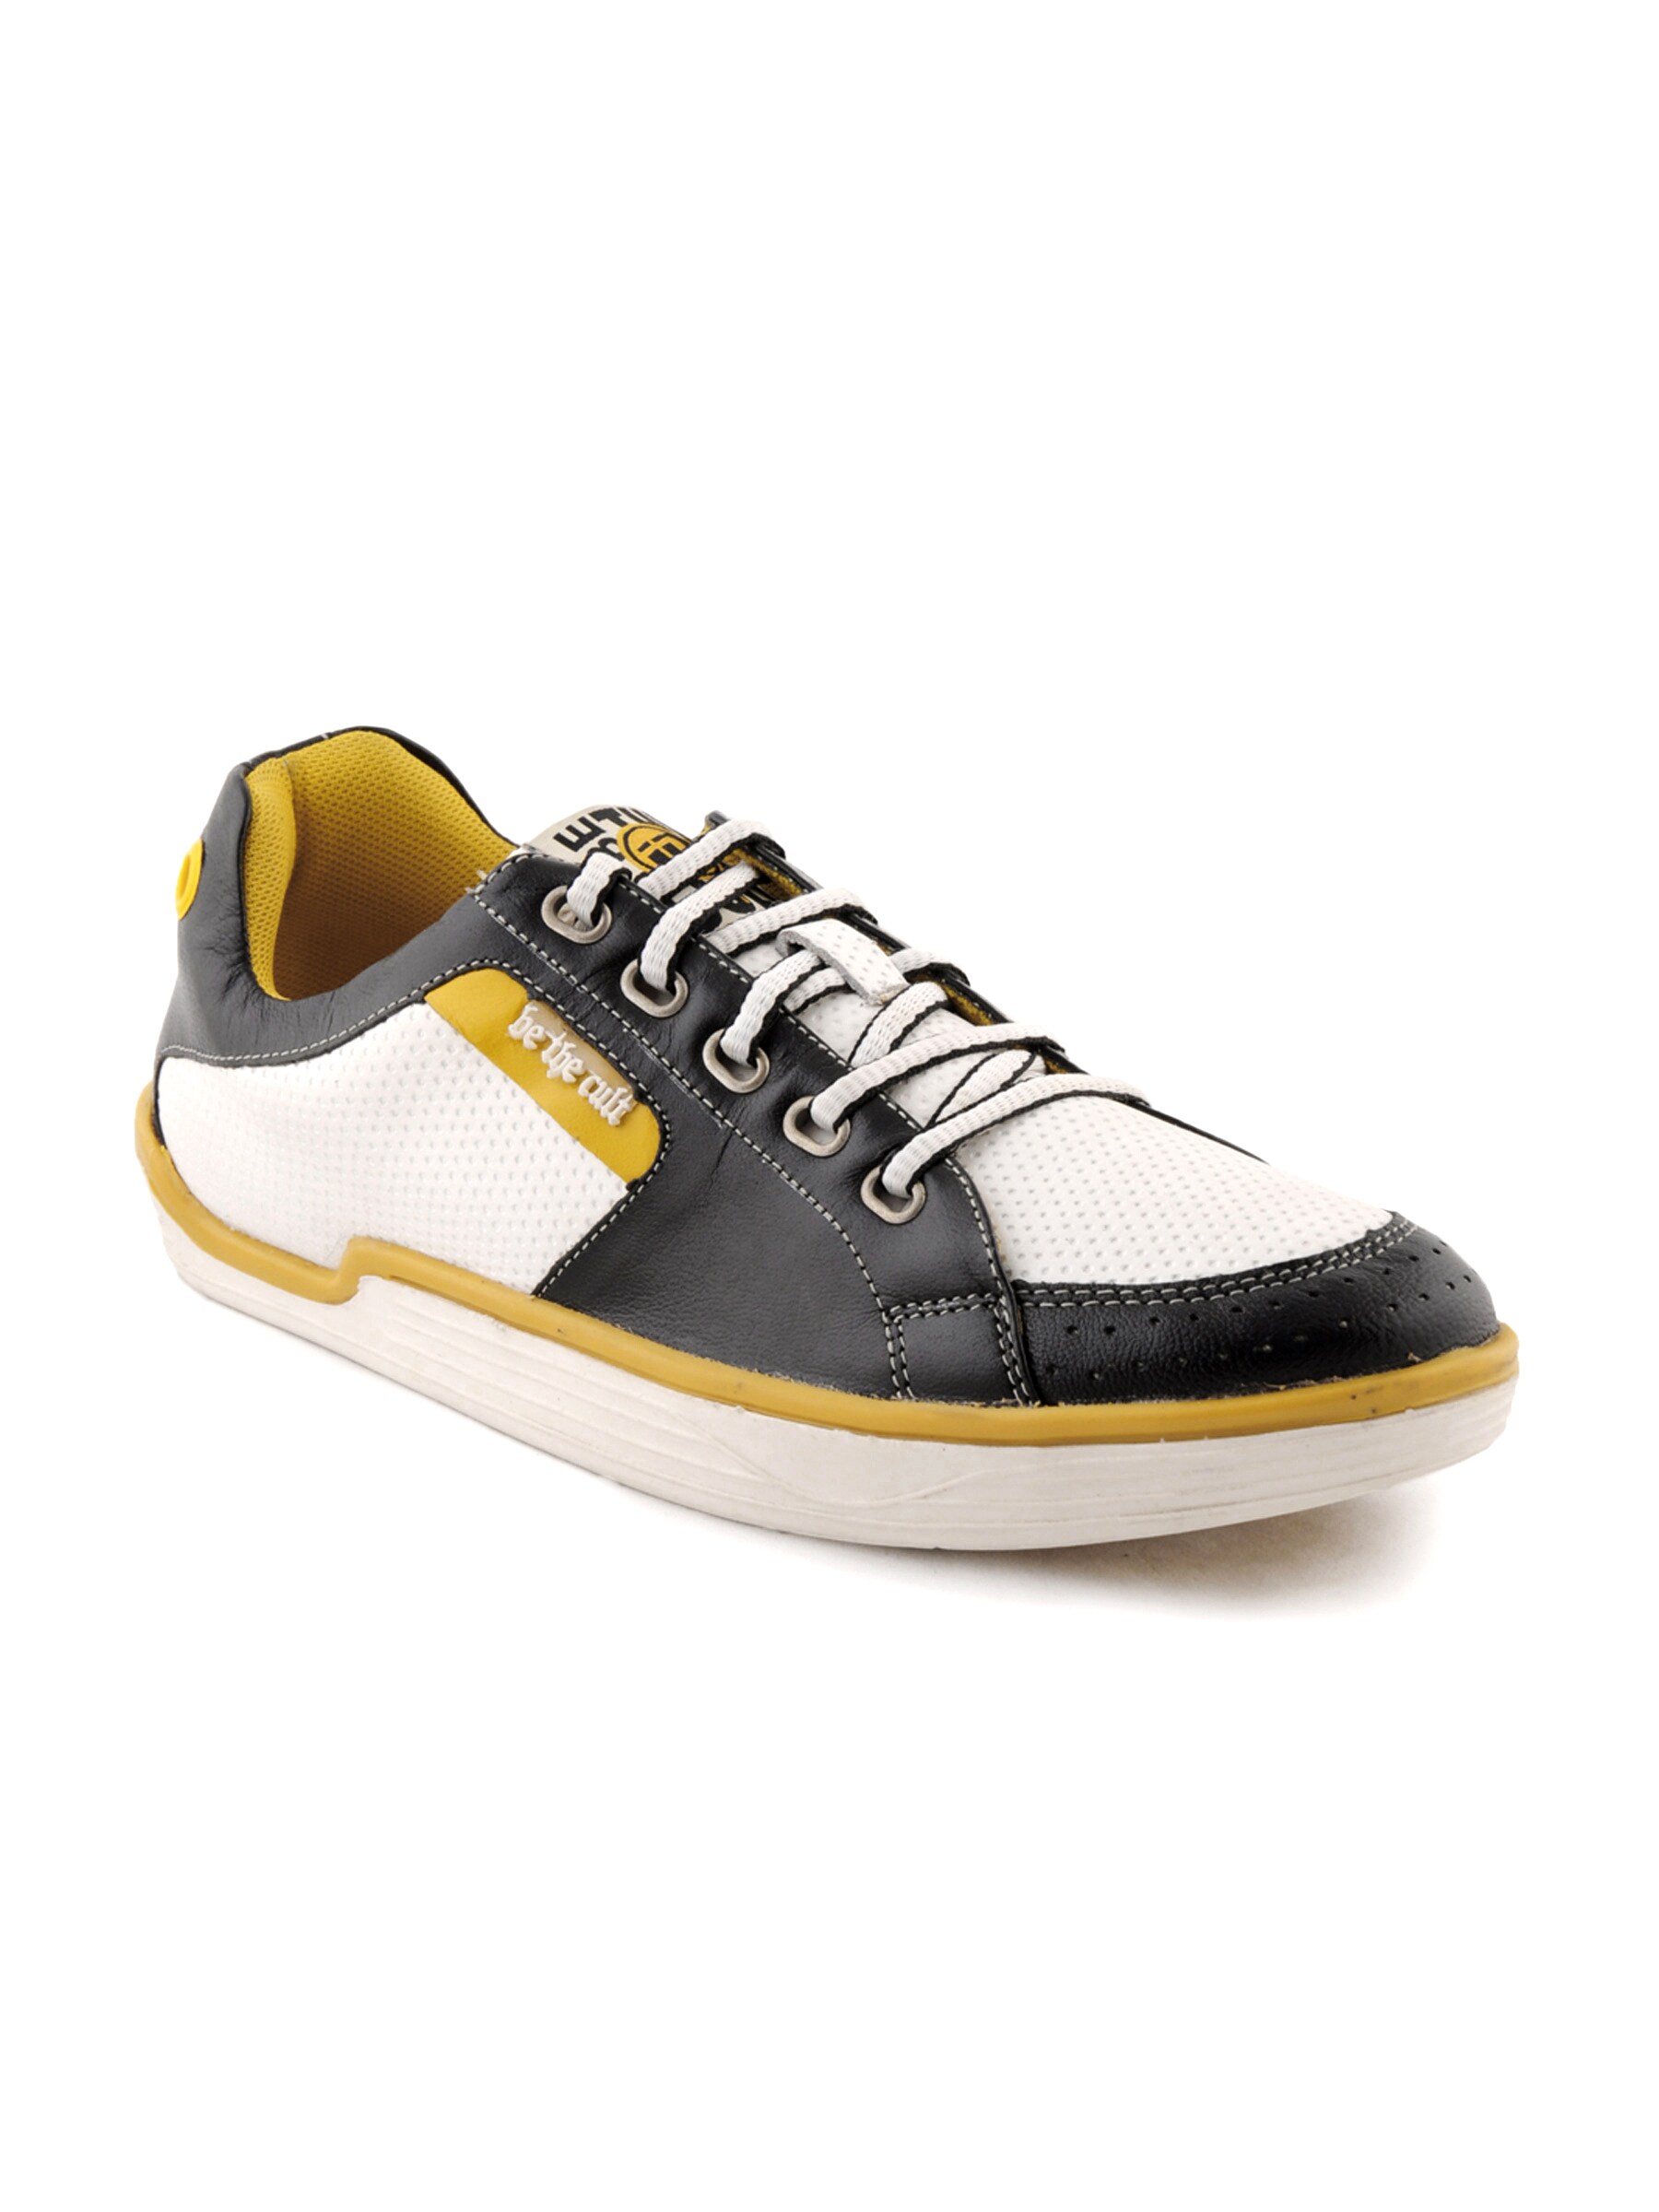 iD Men Casual White Shoes